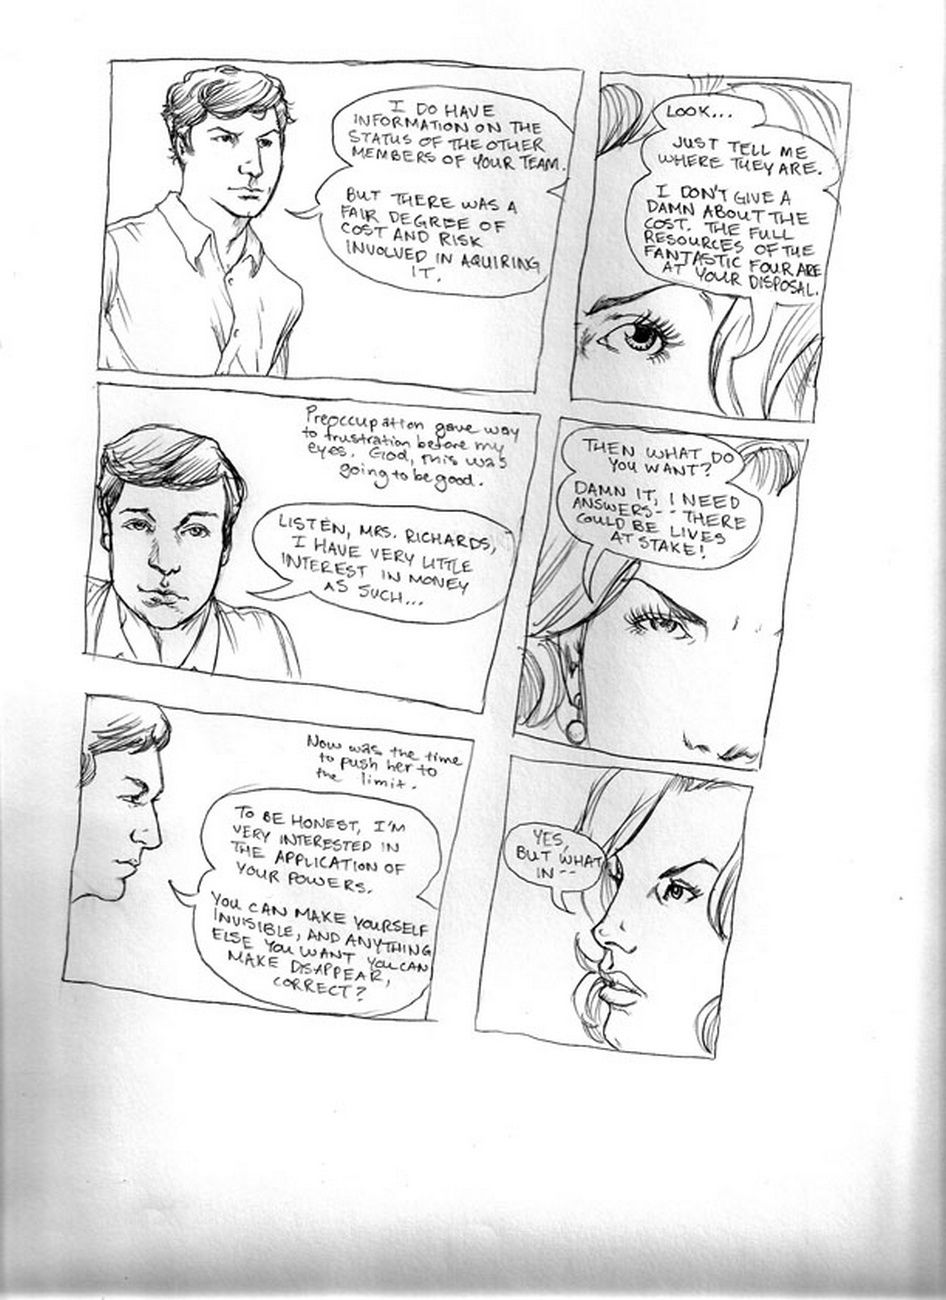 Submission Agenda 5 - The Invisible Woman page 5